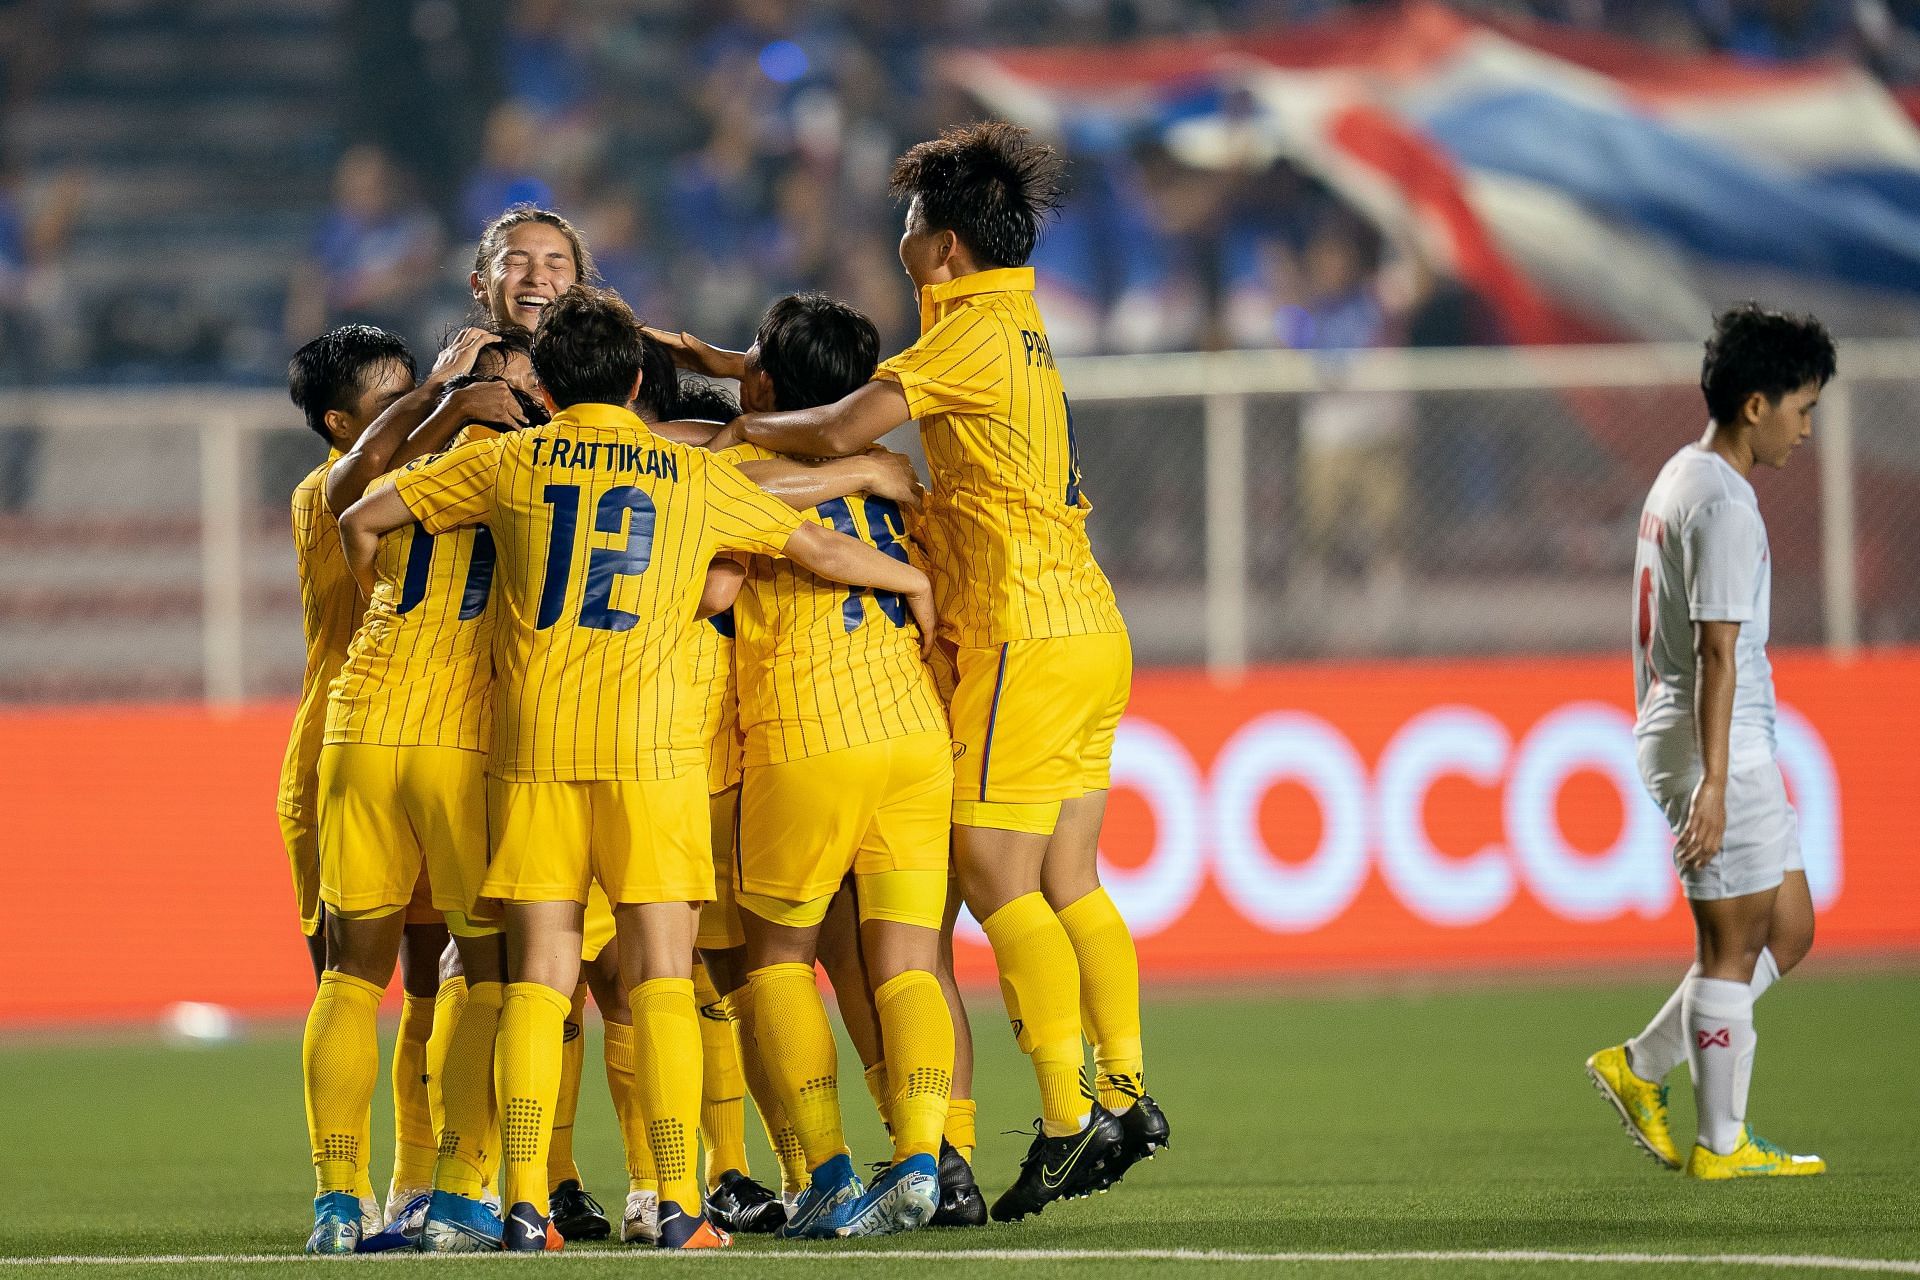 Thailand Women&#039;s Football Team in action during the Southeast Asian Games - Day 5